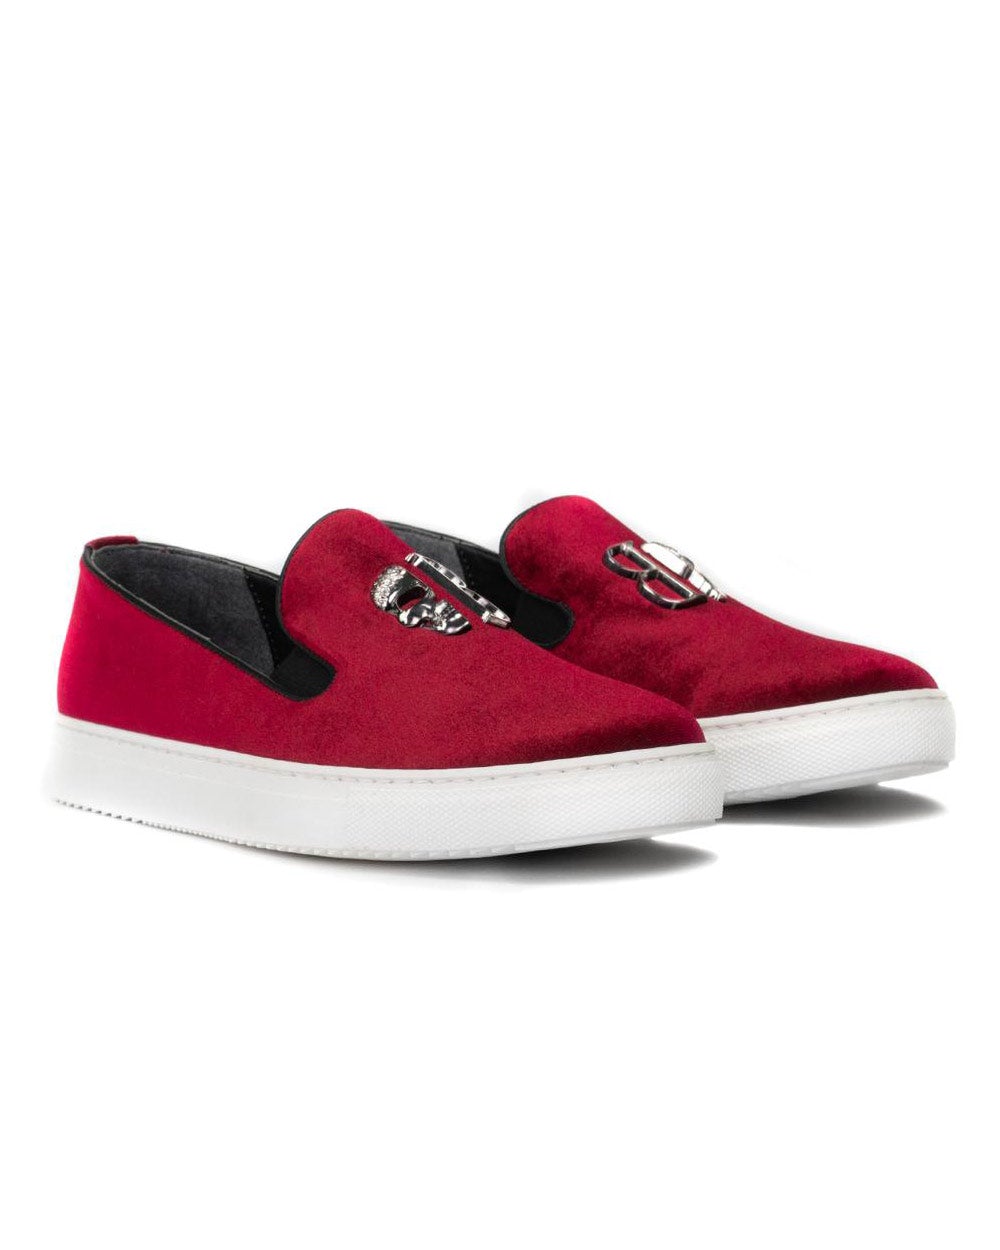 Moccasin shoes suede look burgundy red with metal skull and sneaker type sole for men